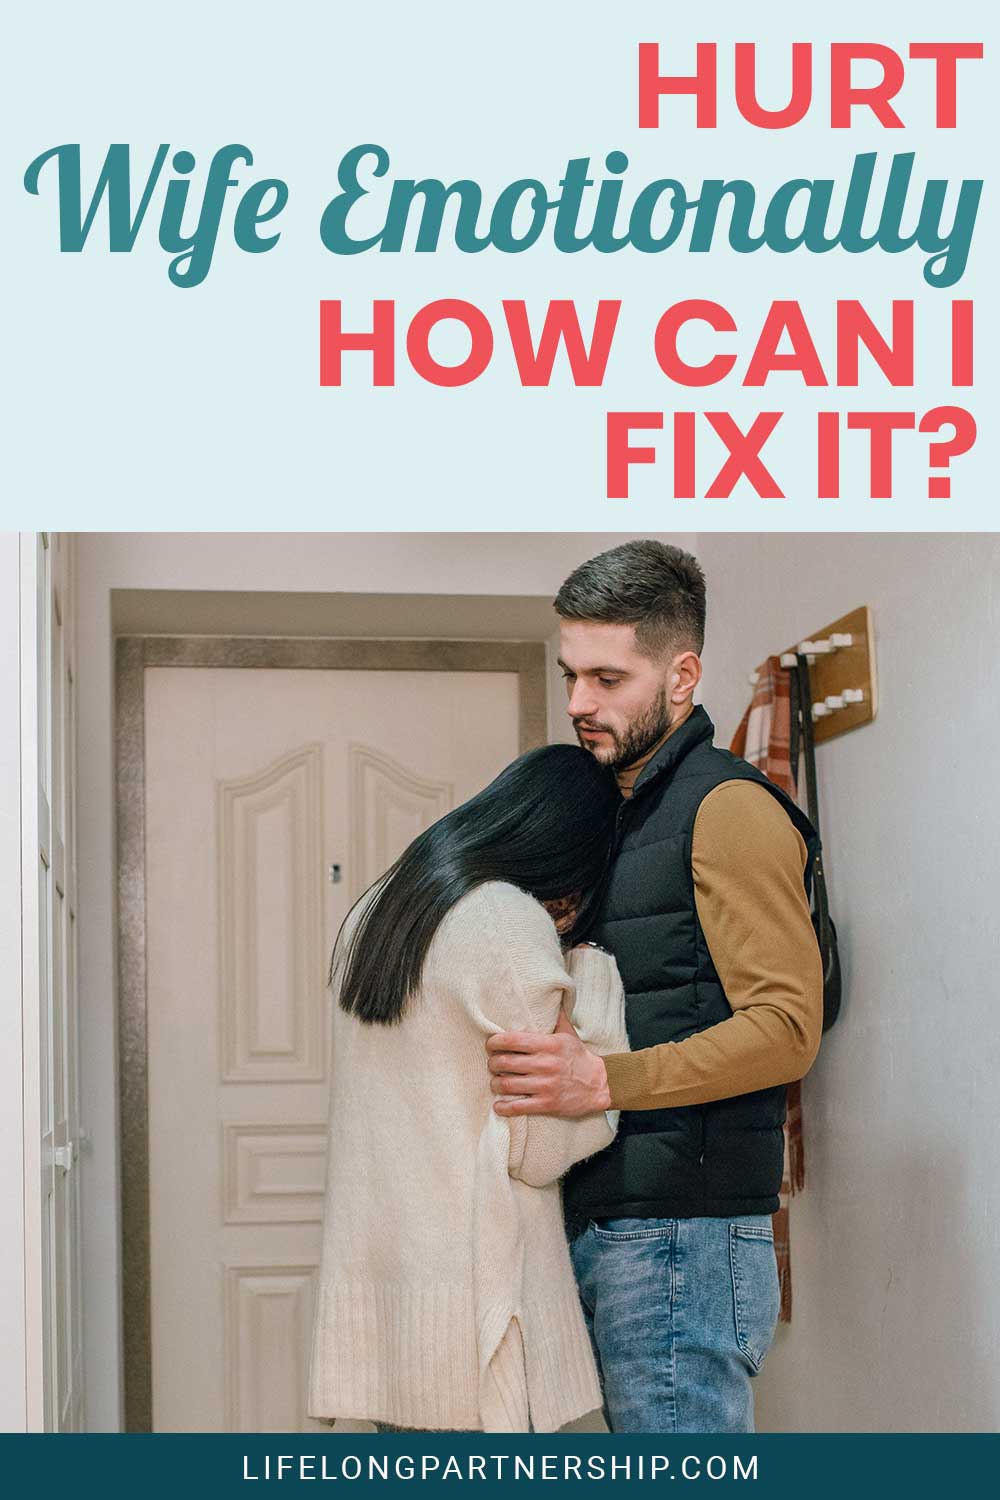 Woman crying on a man's shoulder - Hurt Wife Emotionally, How Can I Fix It?